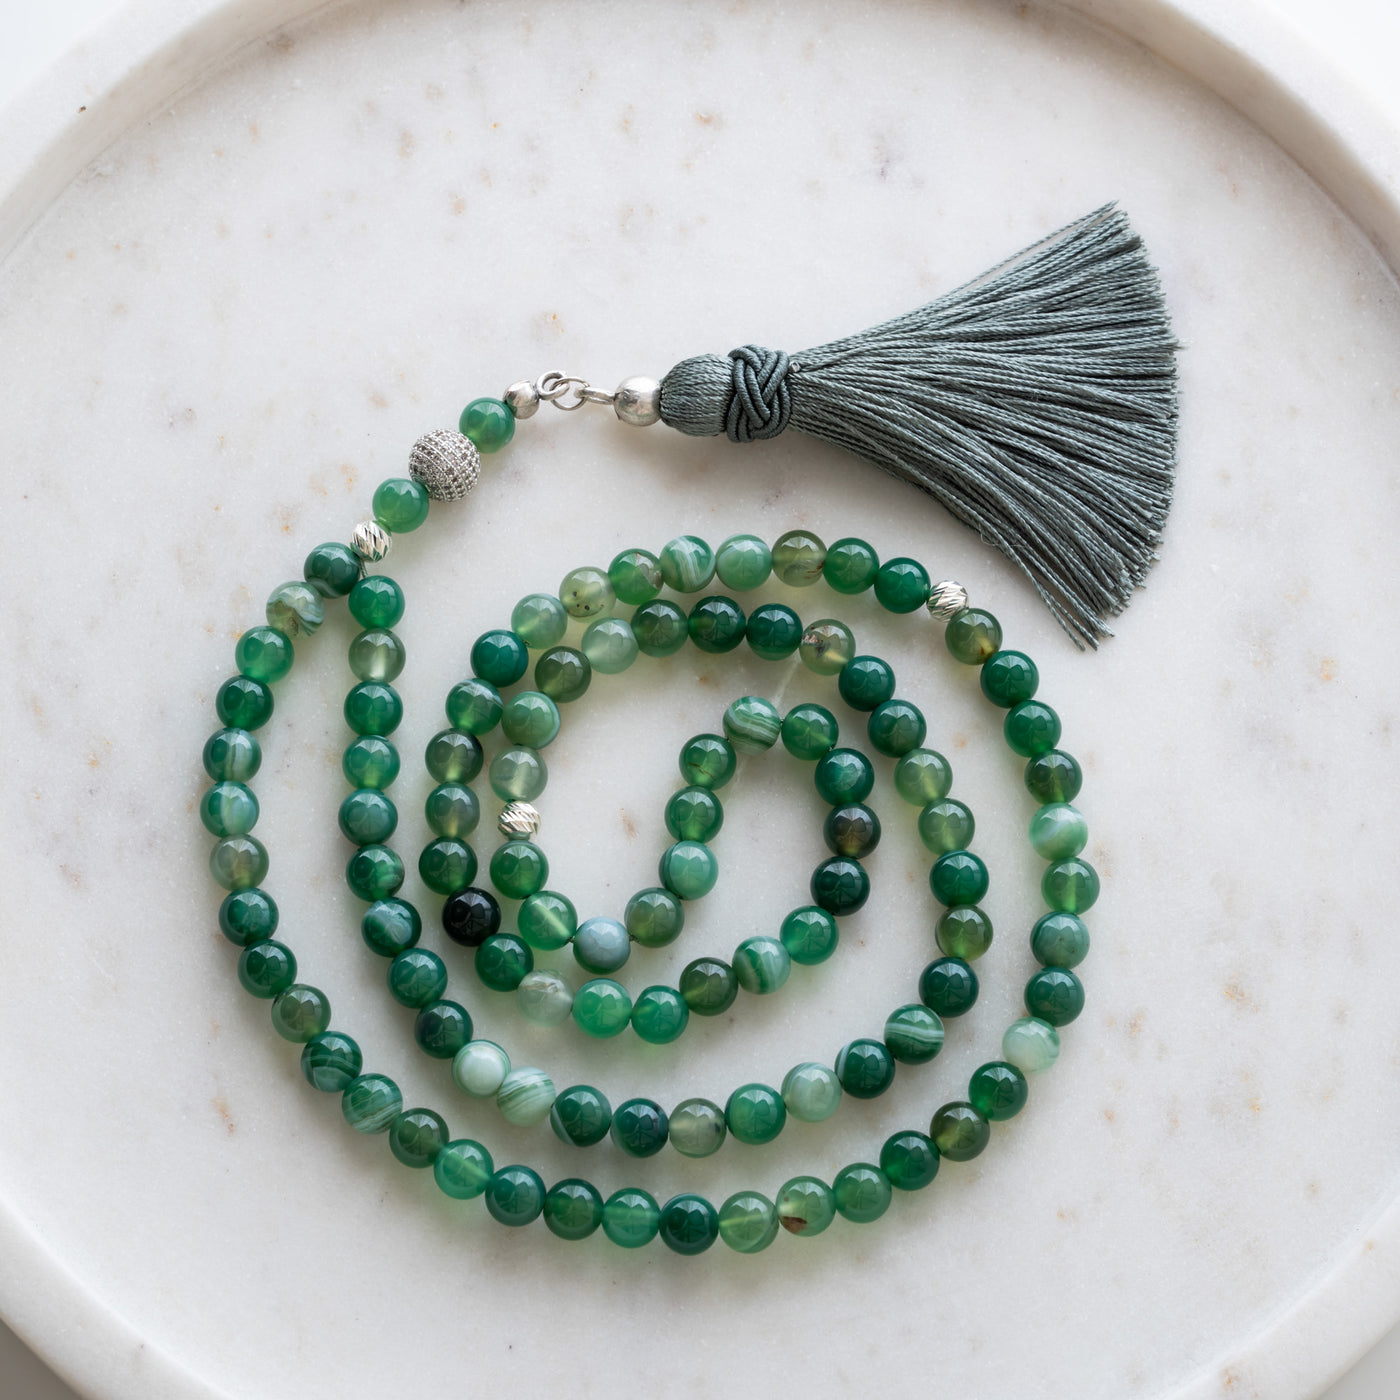 99 Prayer beads - Green Agate Gemstone. With cubic zirconia and sterling silver separators. The Tasbih are handmade in Turkey with big attention to details and quality.